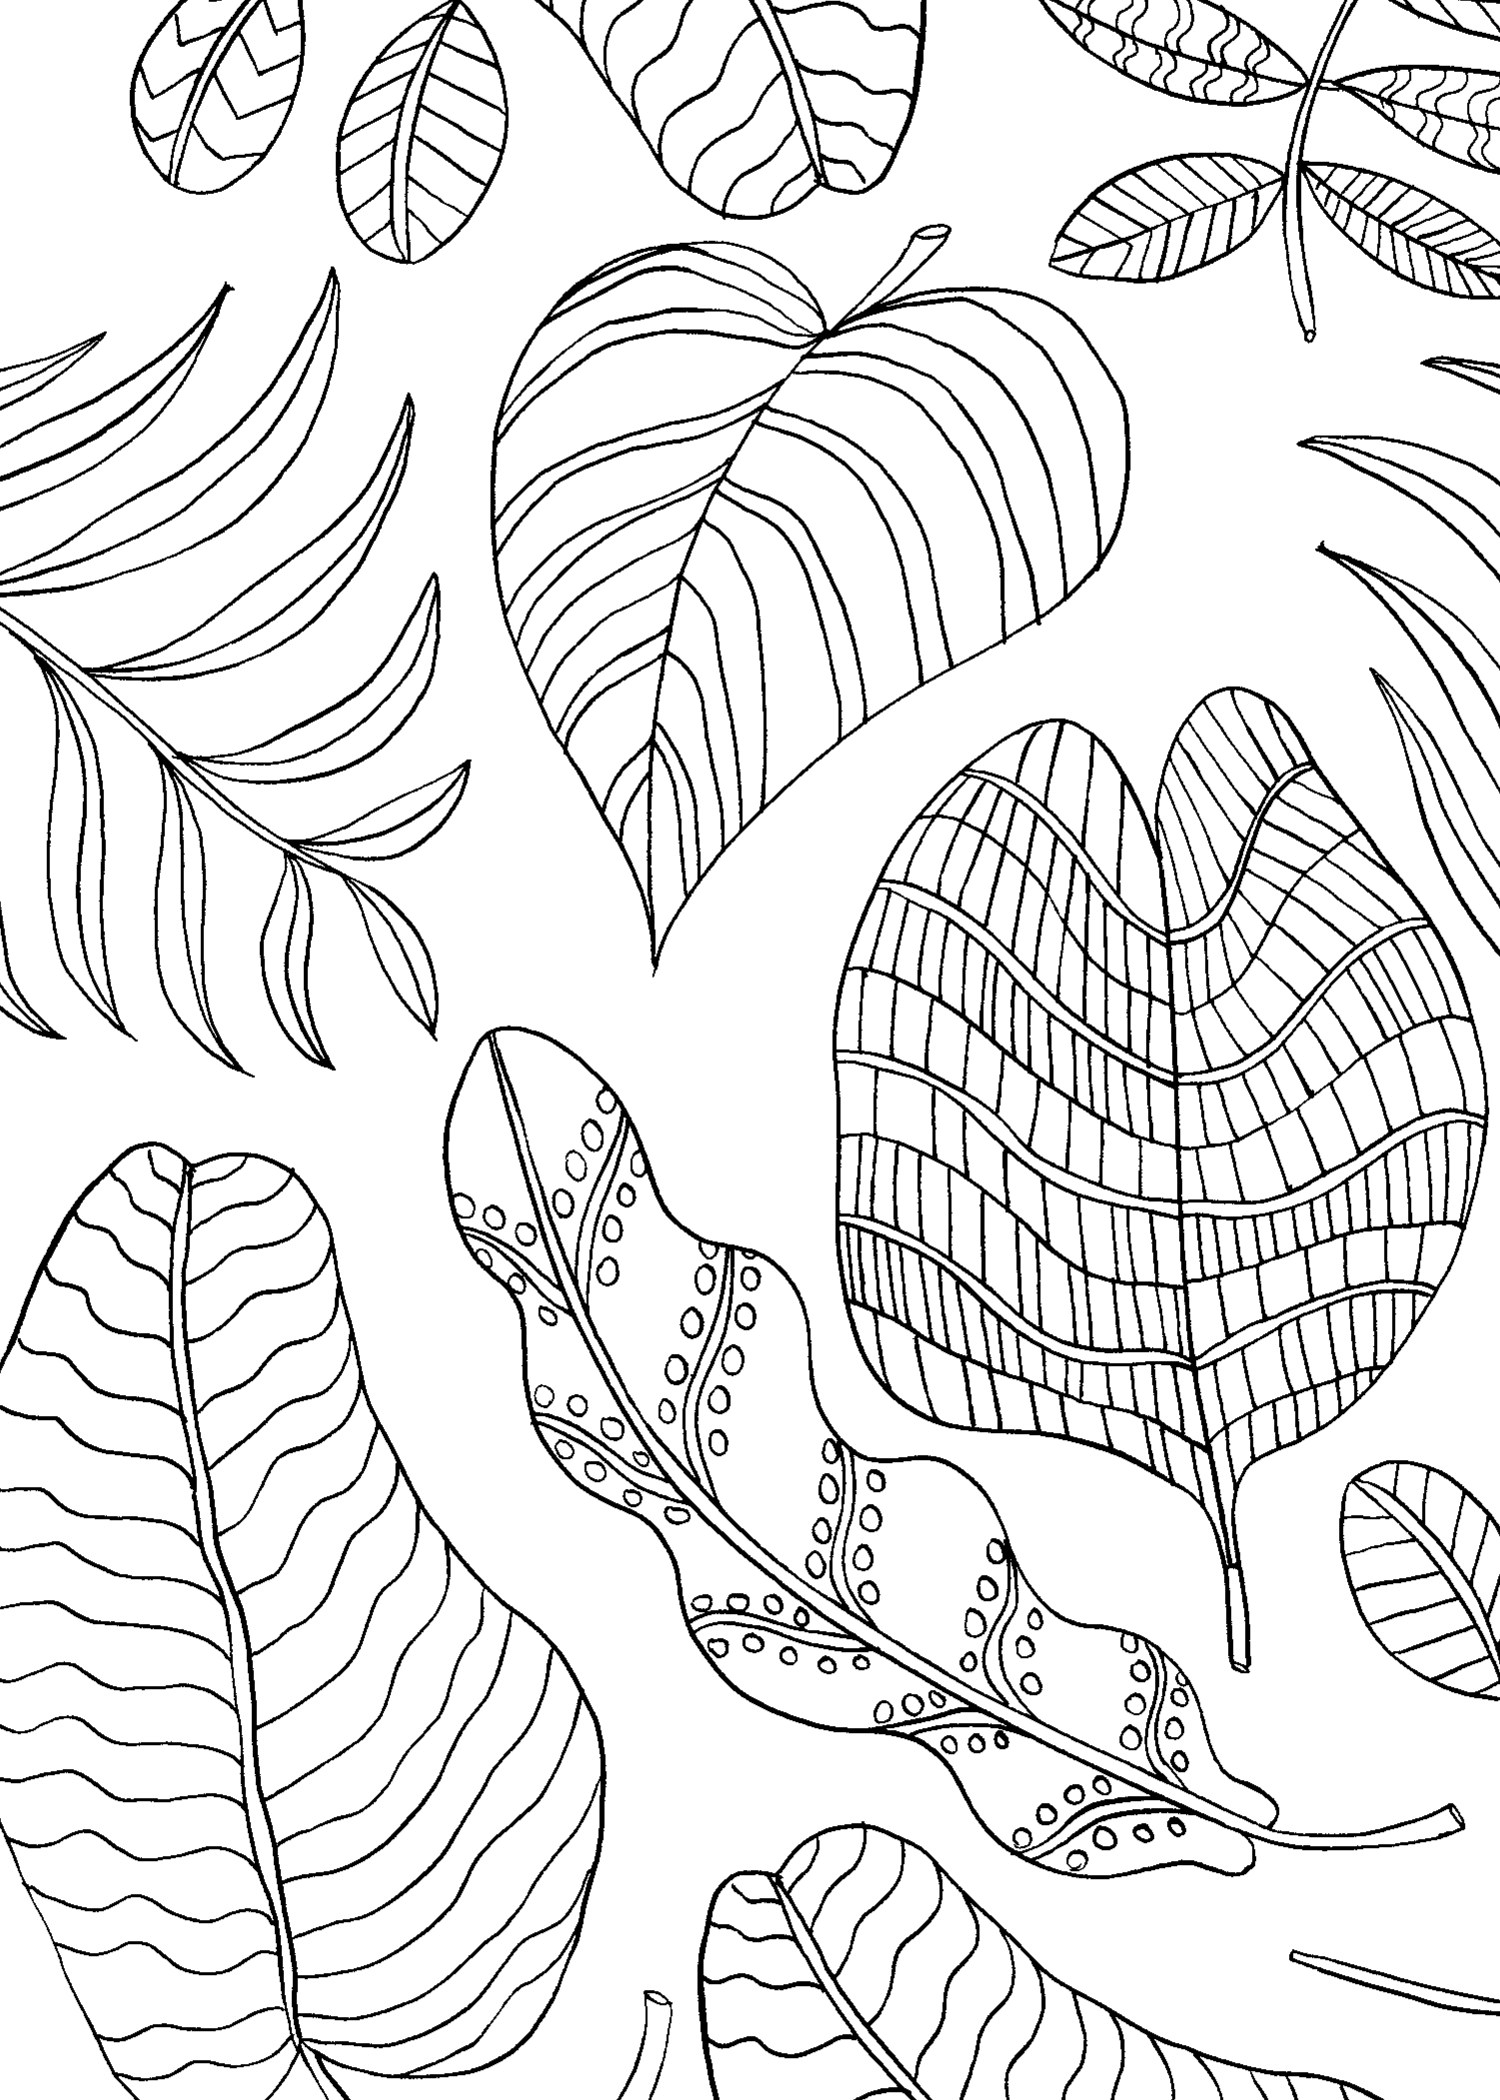 Download Mindfulness Coloring Pages - Best Coloring Pages For Kids